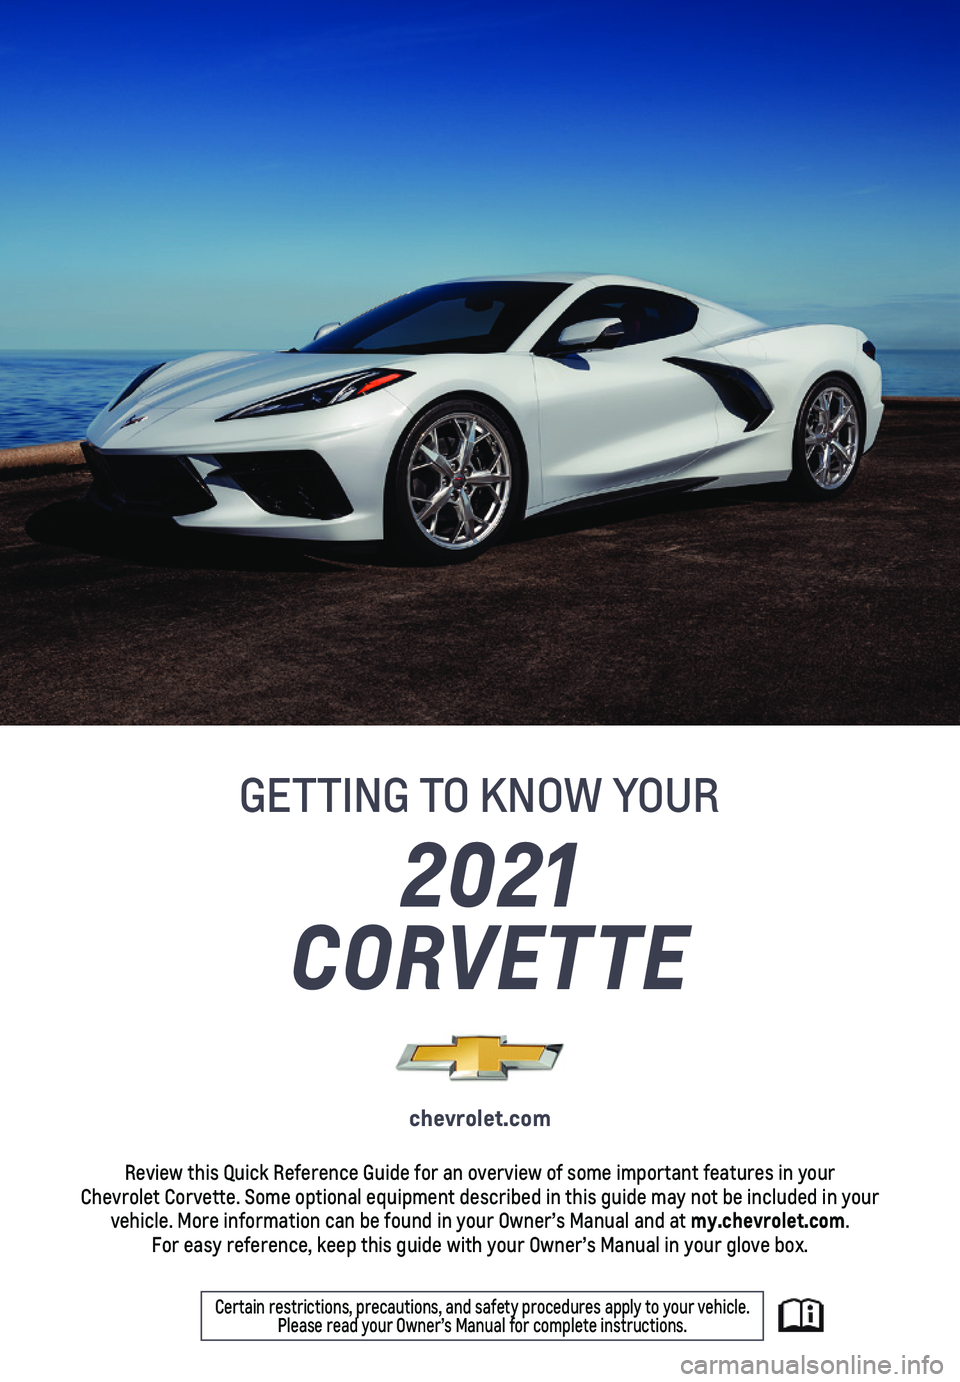 CHEVROLET CORVETTE 2021  Get To Know Guide 2021 
CORVETTE
GETTING TO KNOW YOUR
chevrolet.com
Review this Quick Reference Guide for an overview of some important feat\
ures in your  Chevrolet Corvette. Some optional equipment described in this 